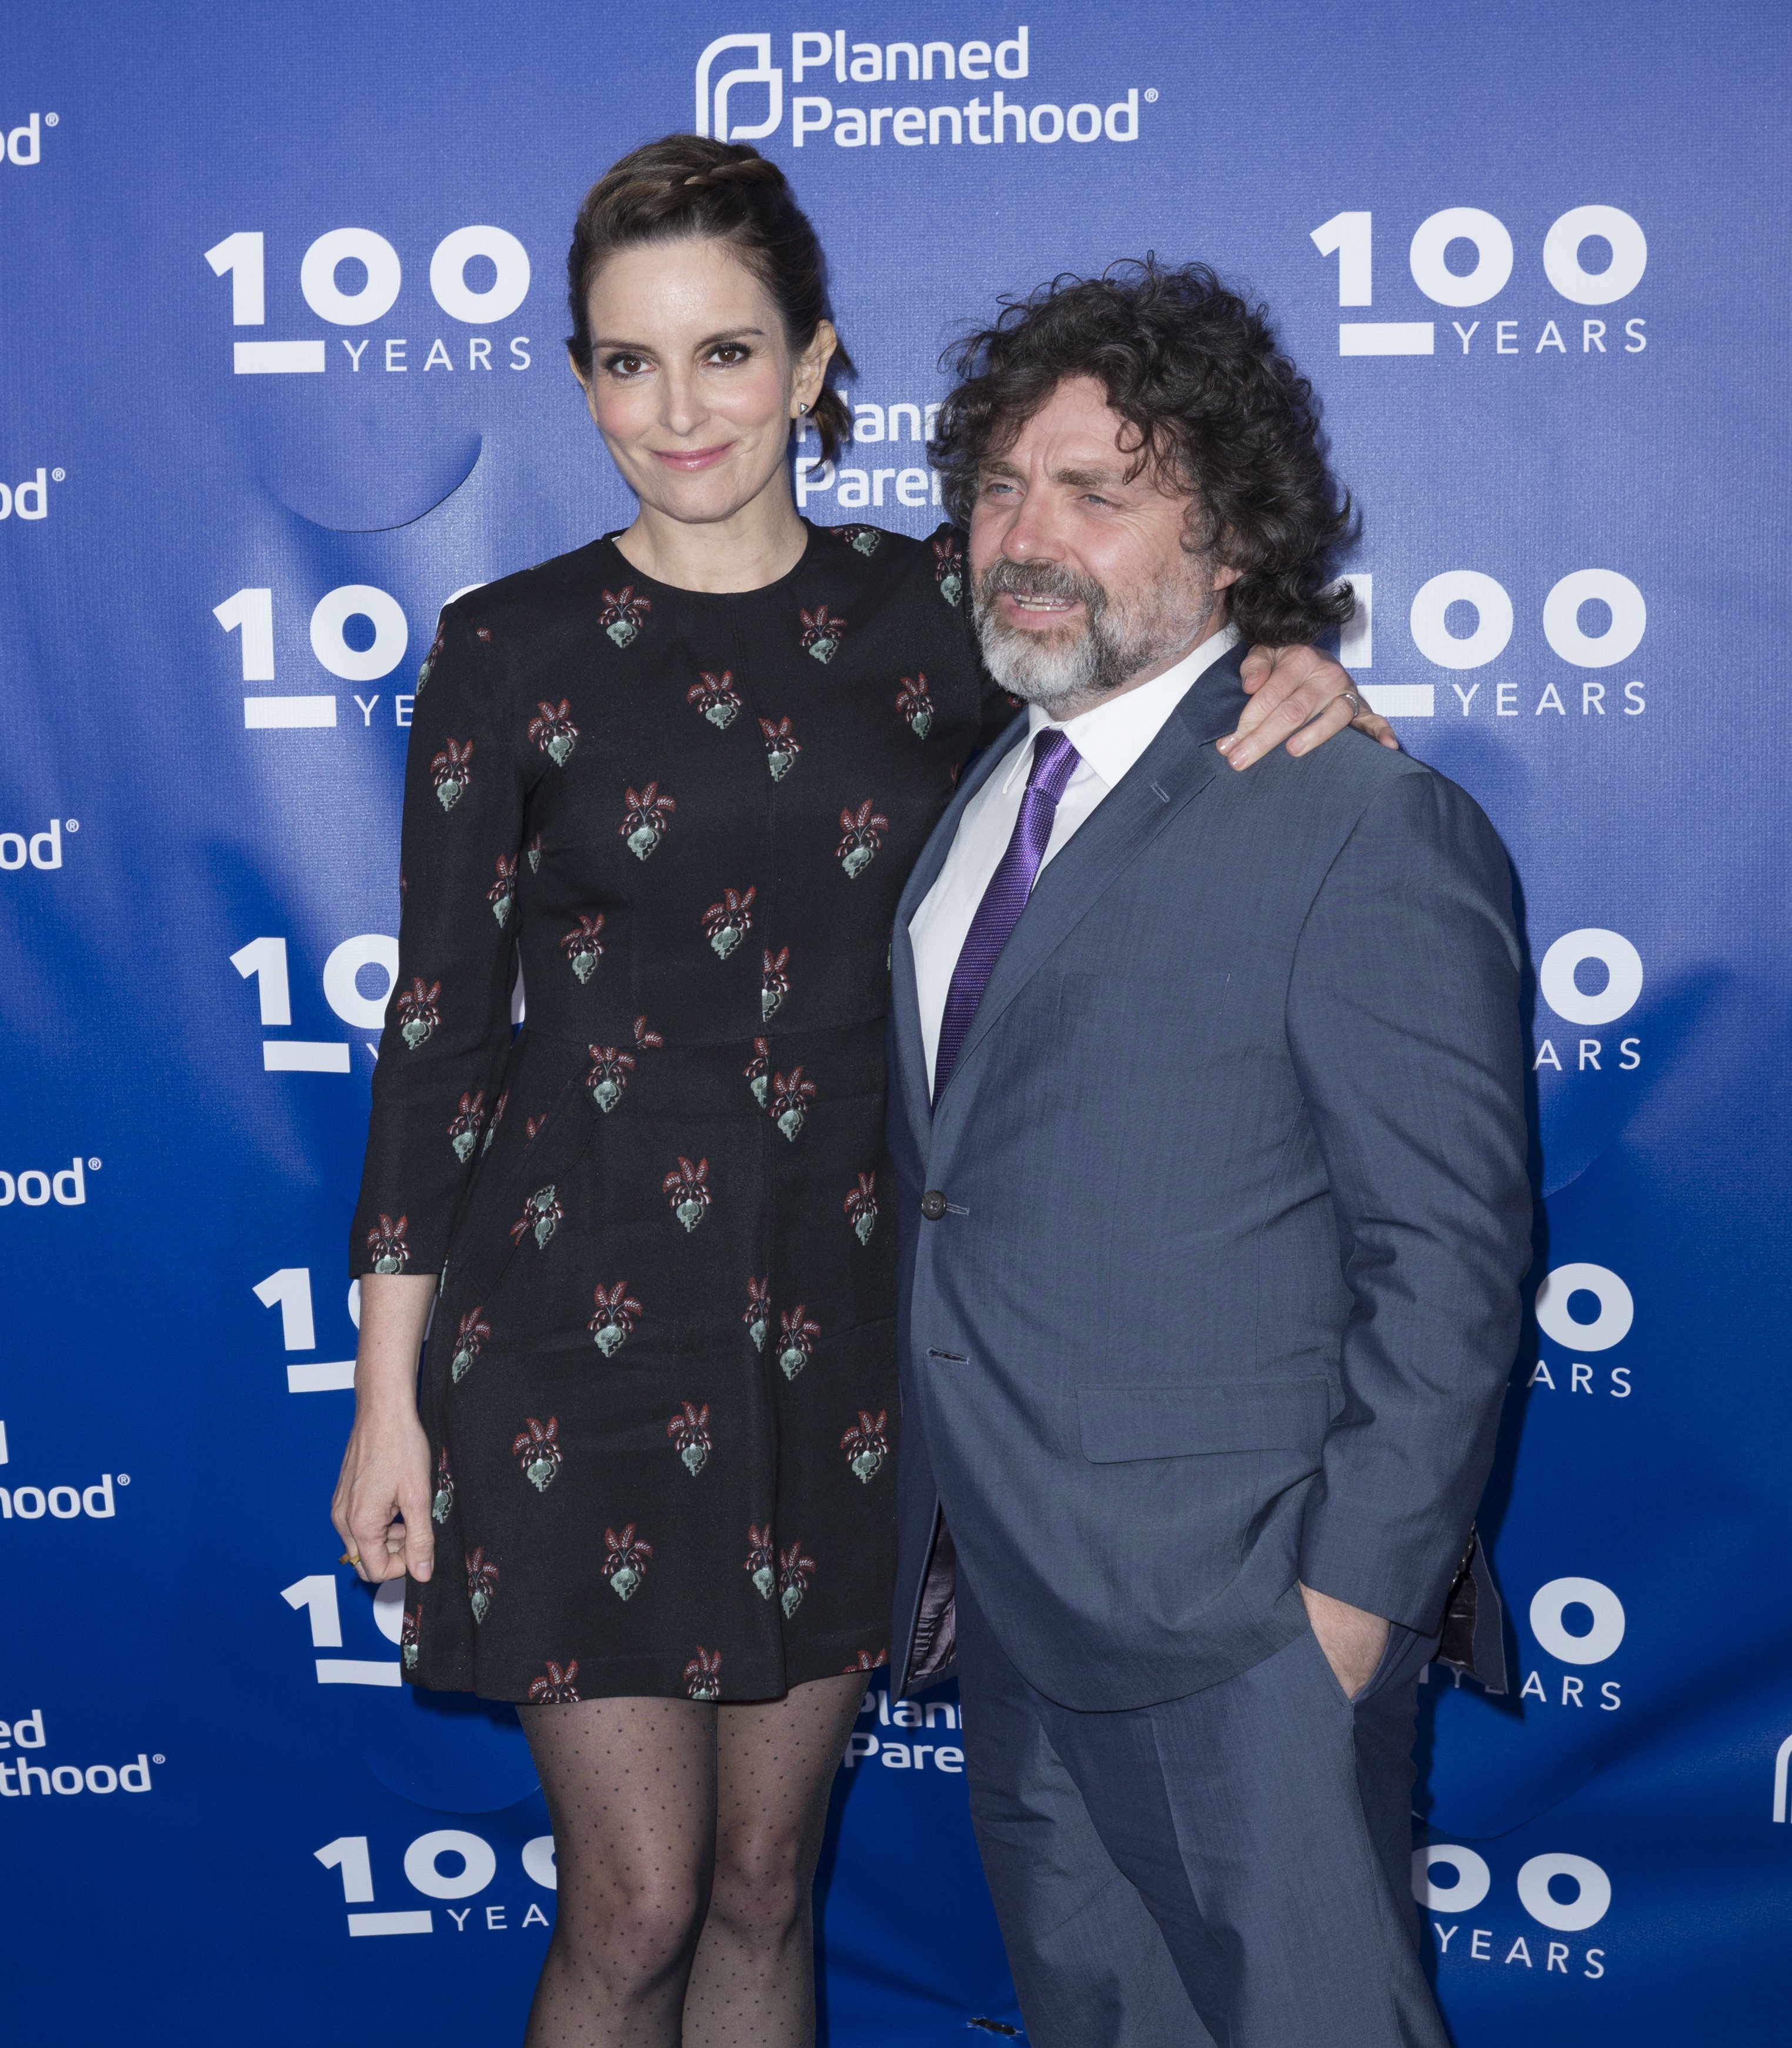 Tina Fey and Jeff Richmond at the Planned Parenthood 100th Anniversary Gala on May, 2 2017 in New York. | Source: Shutterstock 